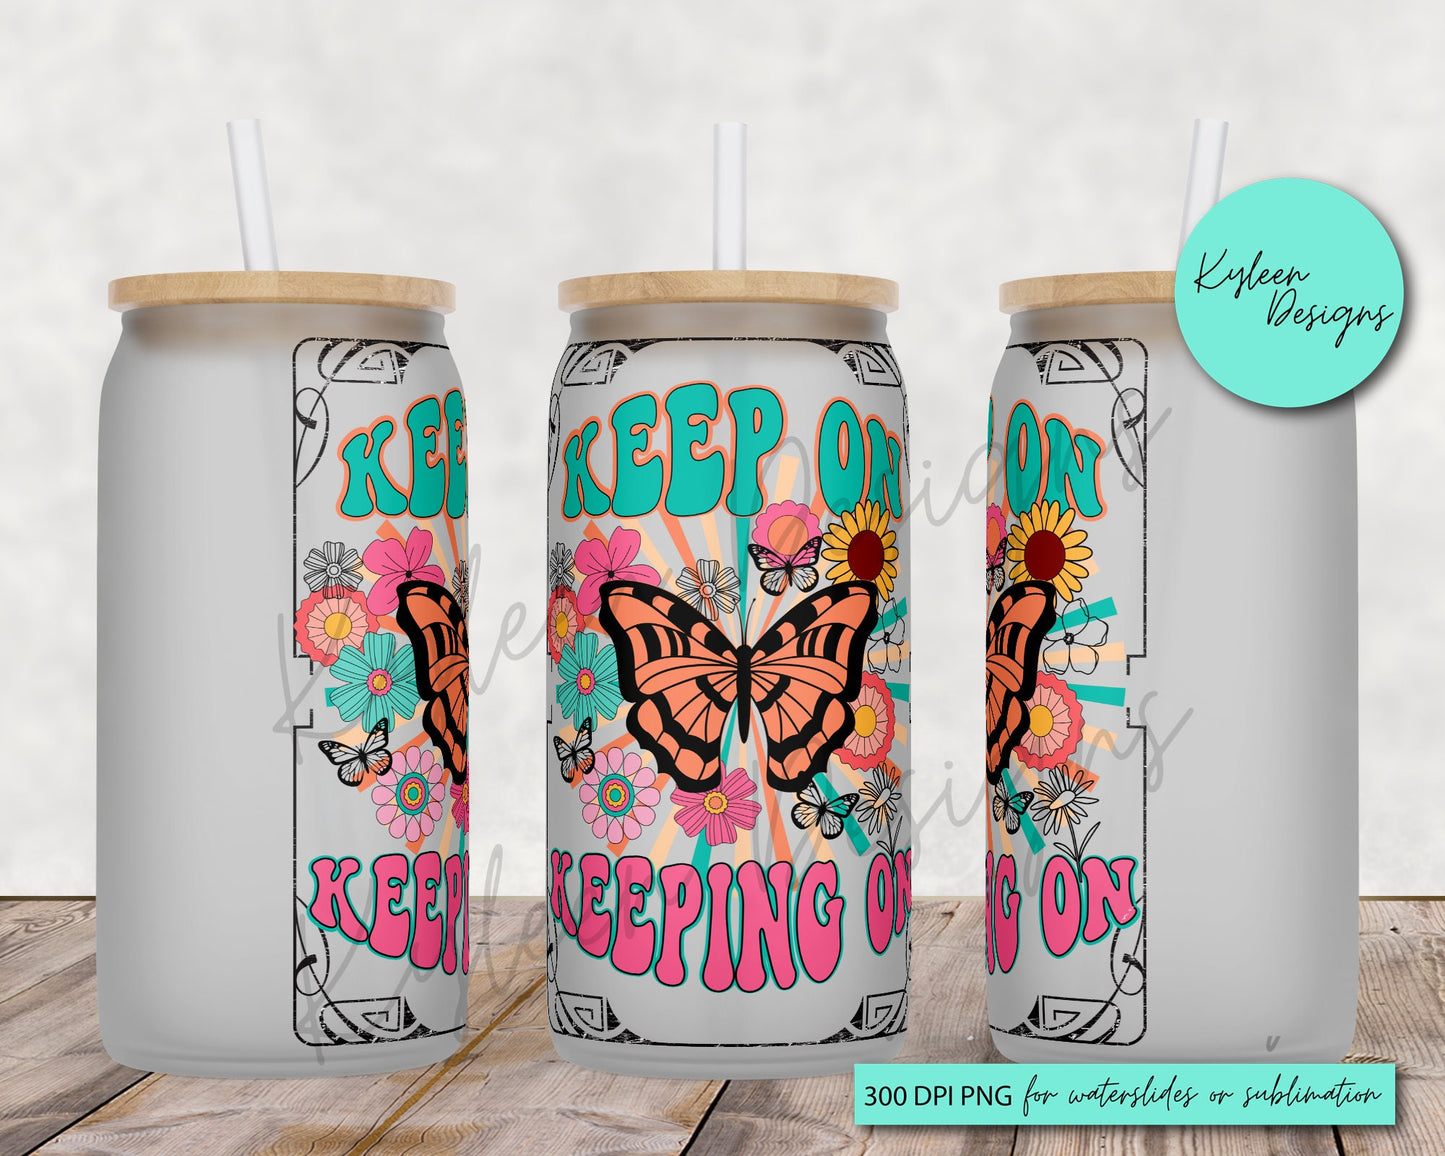 Keep on keeping on boho retro hippie High RES PNG for coffee/beer glass